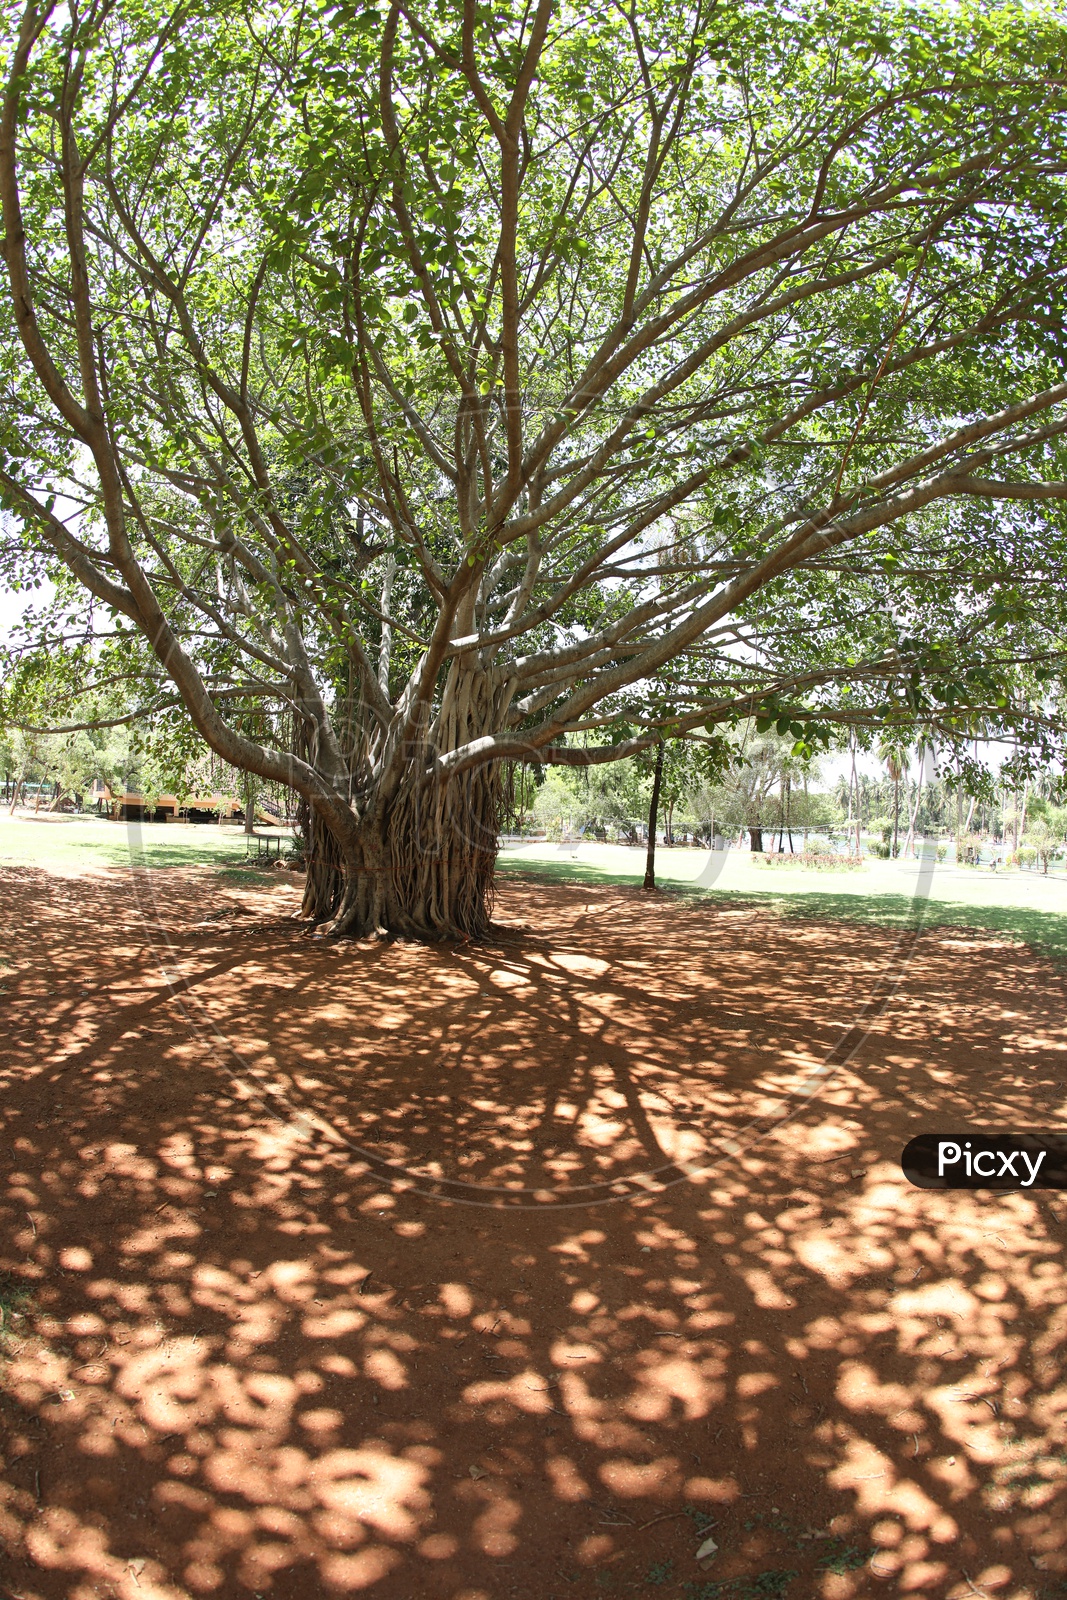 An Isolated Banyan Tree With Roots And Shadow of Banyan Tree in a Park